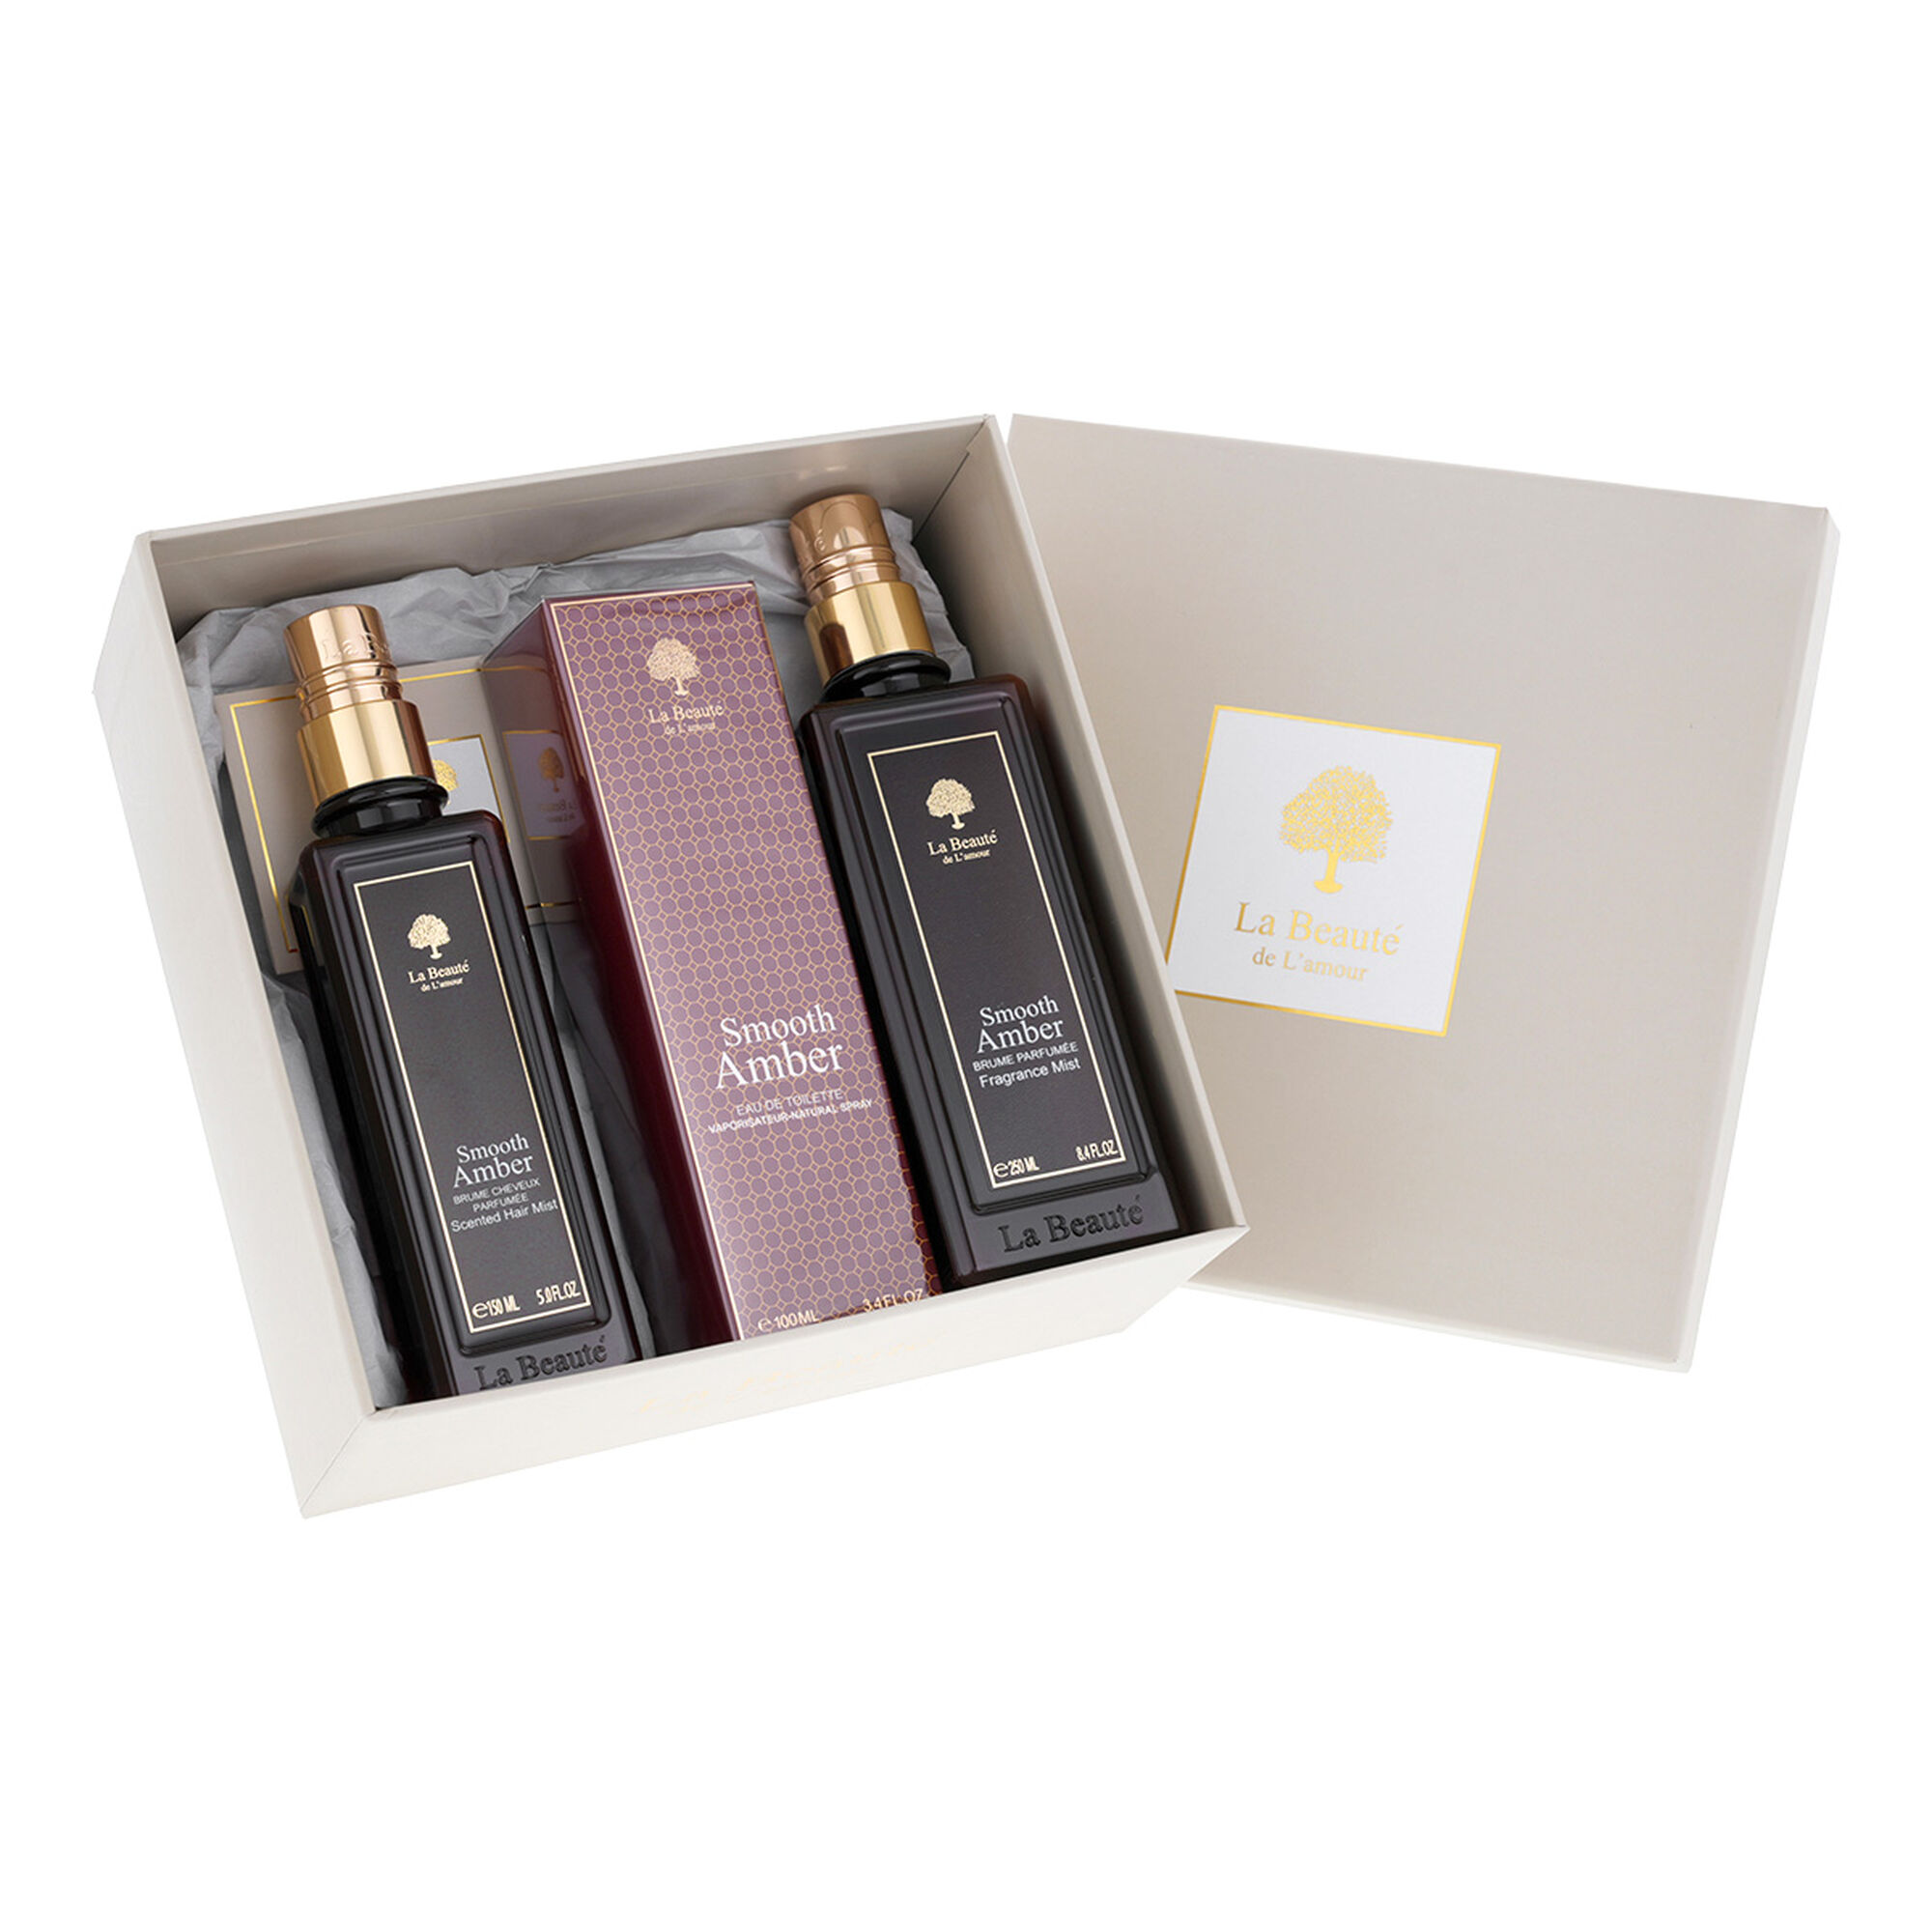 La Beaute Smooth Amber 3-Piece Collection Set